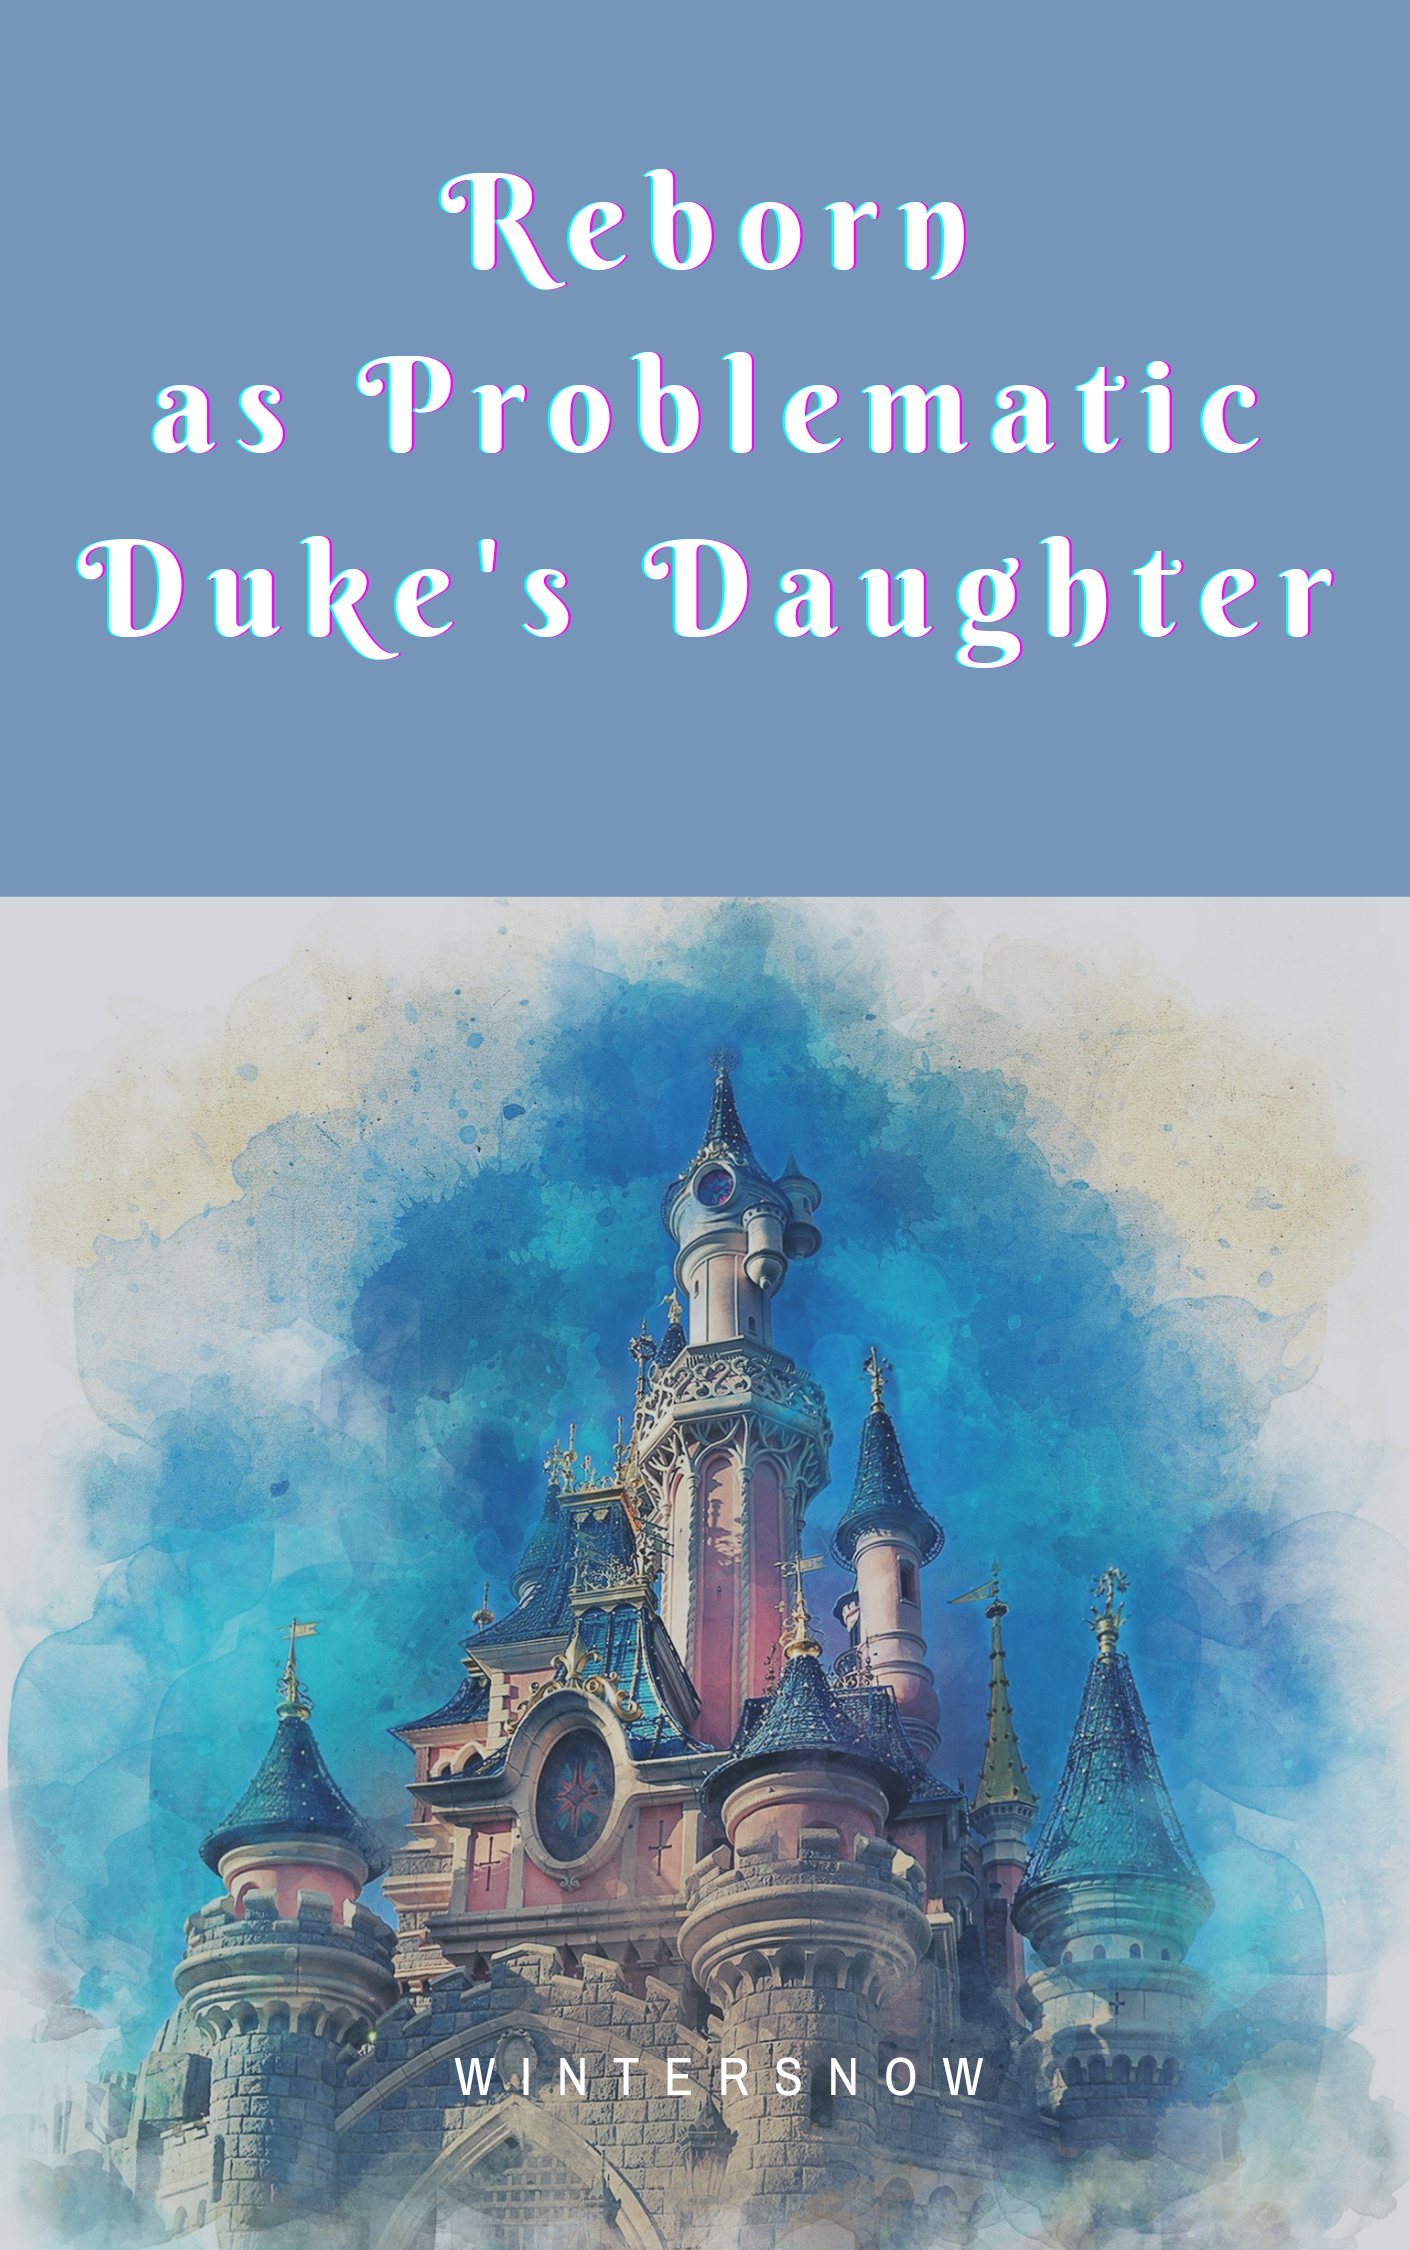 Reborn as a problematic Duke's daughter By Wintersnow | Libri